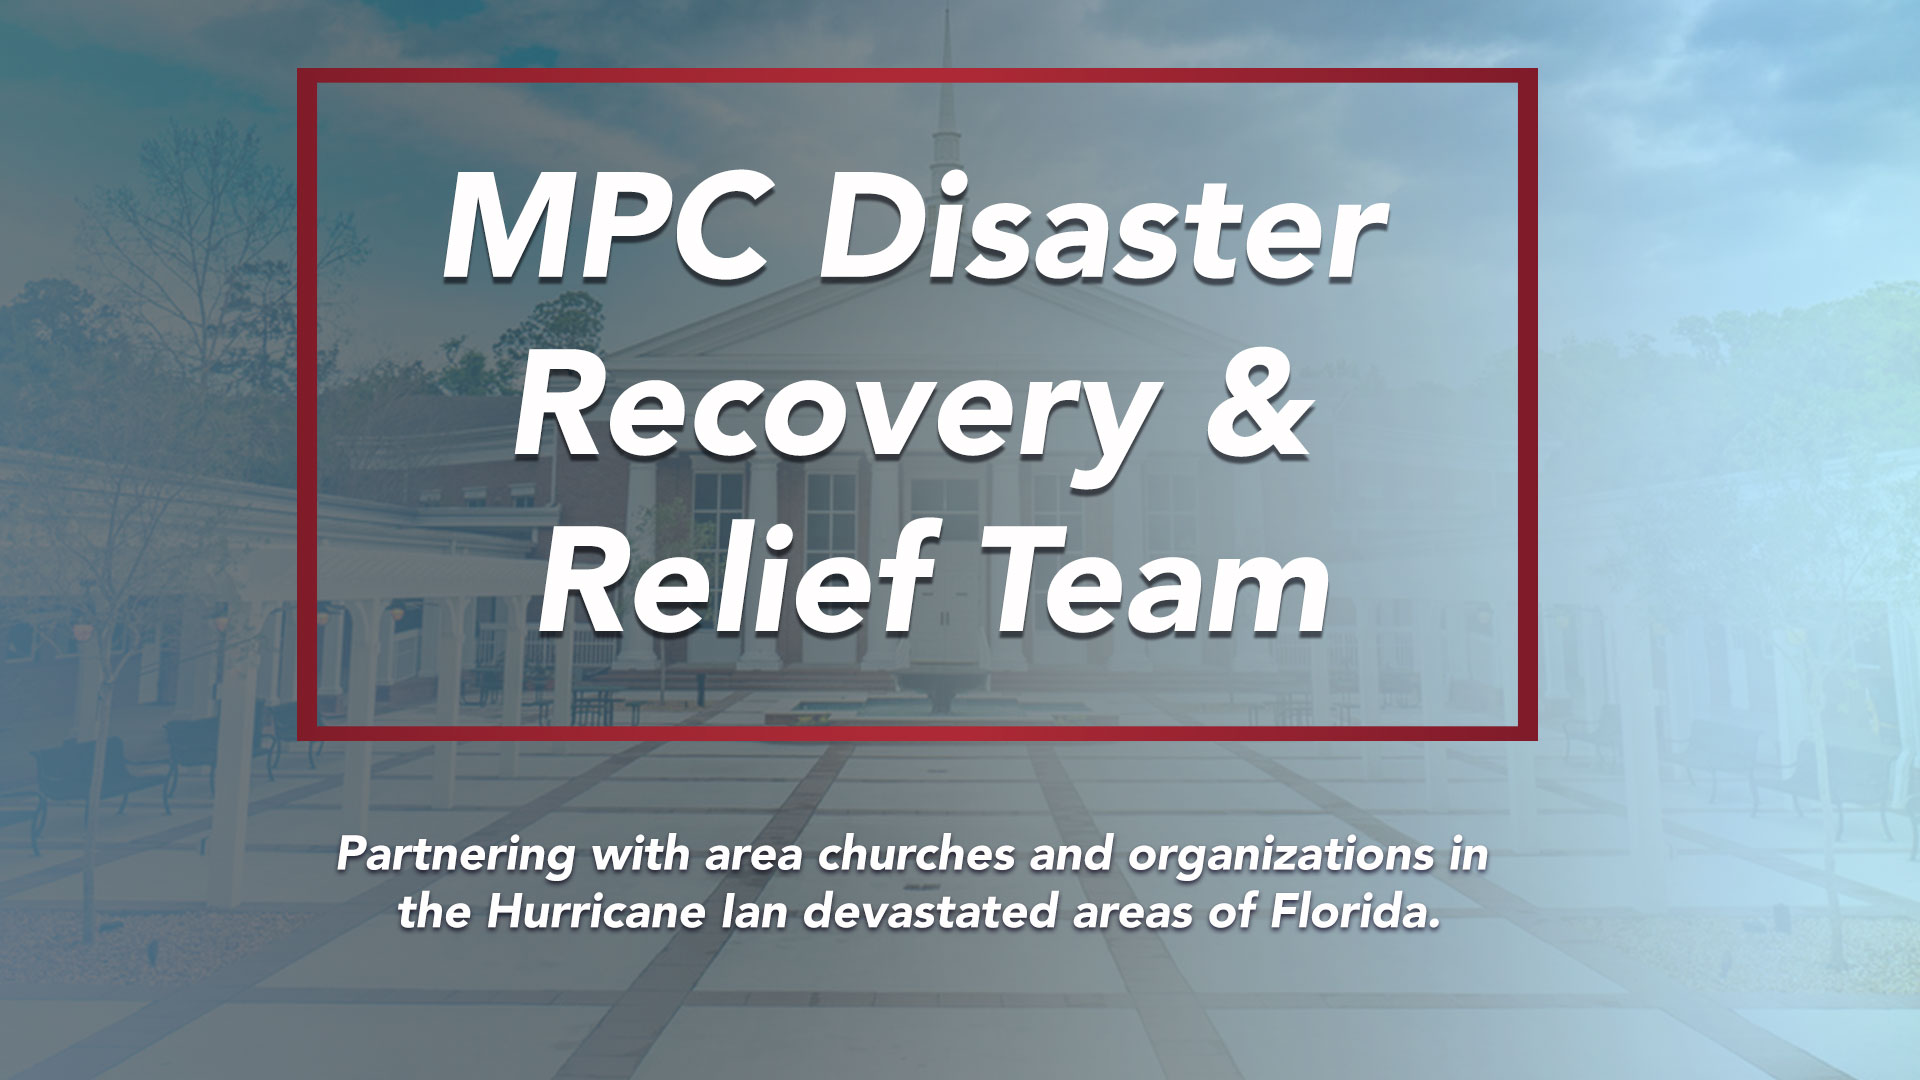 Disaster Relief & Recovery Team

MPC is partnering with a community of faith in the Hurricane Ian devastated areas.
